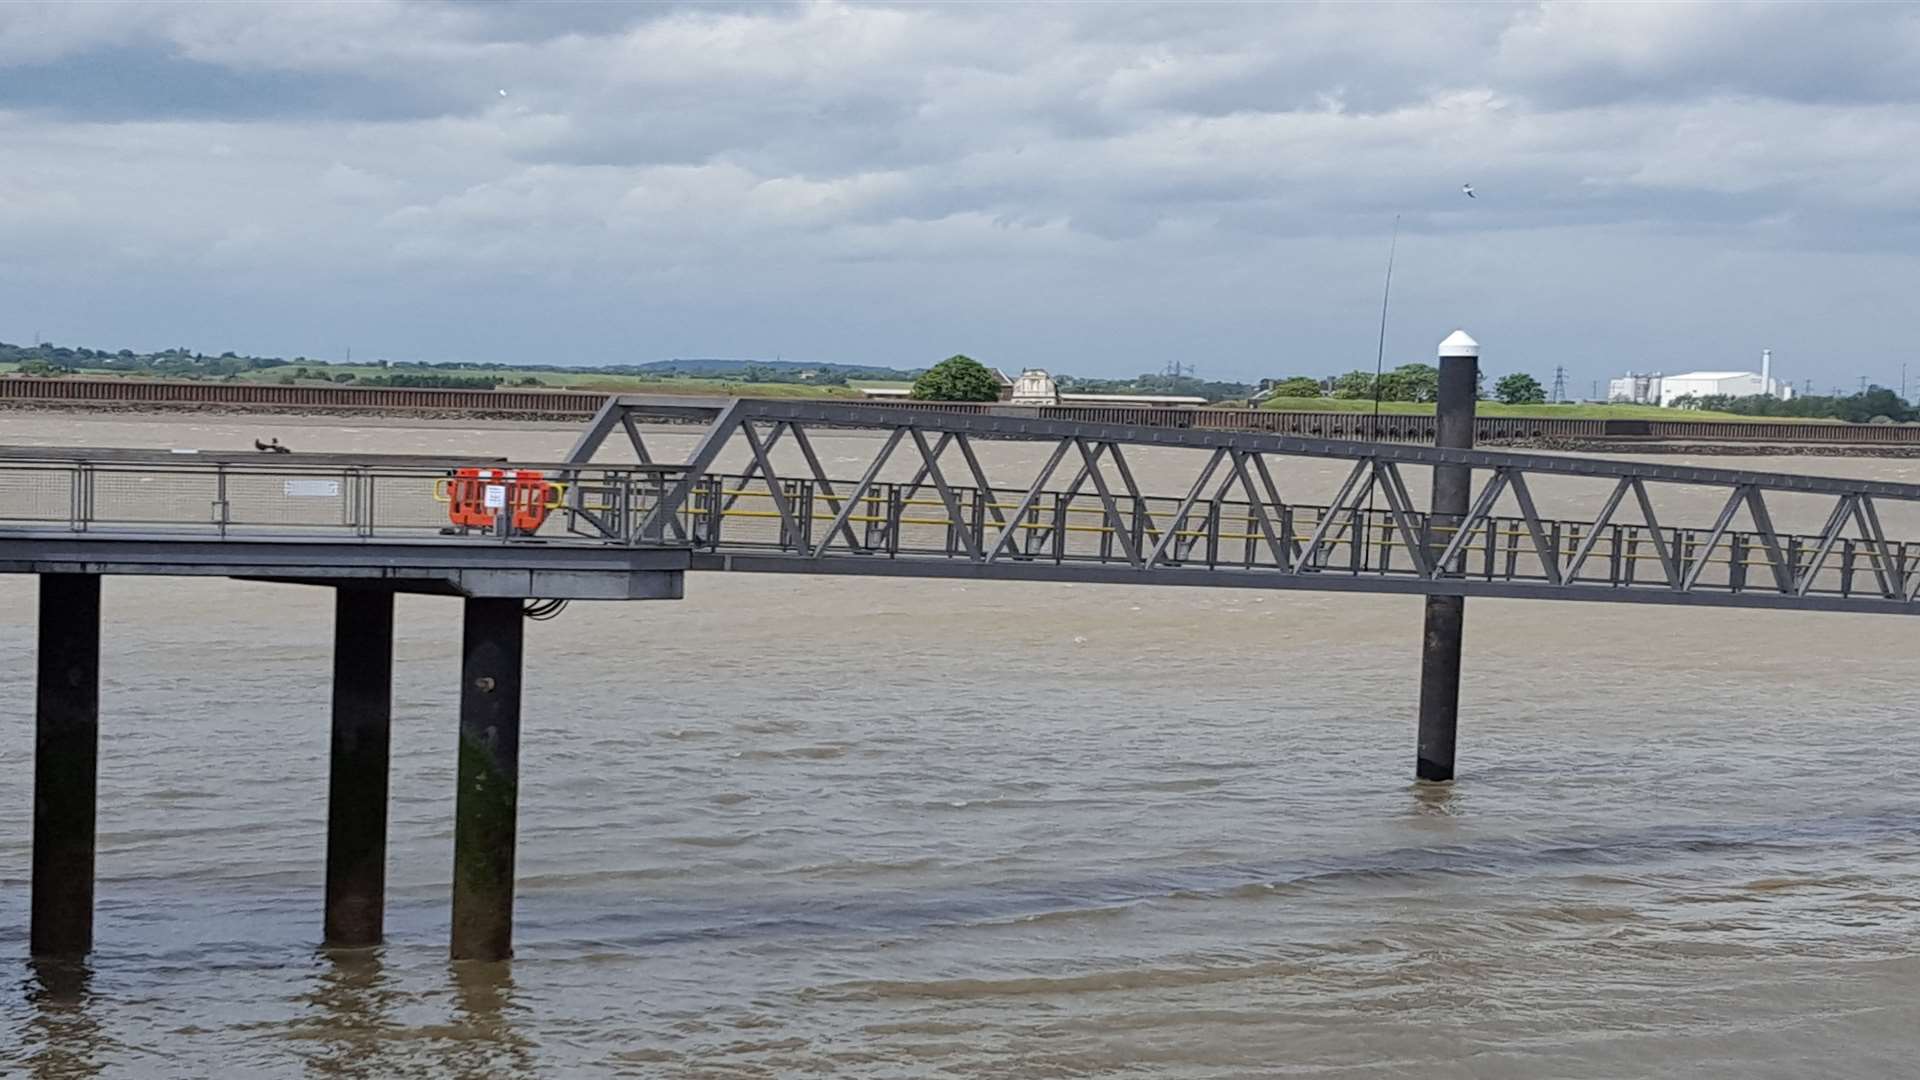 The pontoon leading to the ferry has been declared unsafe